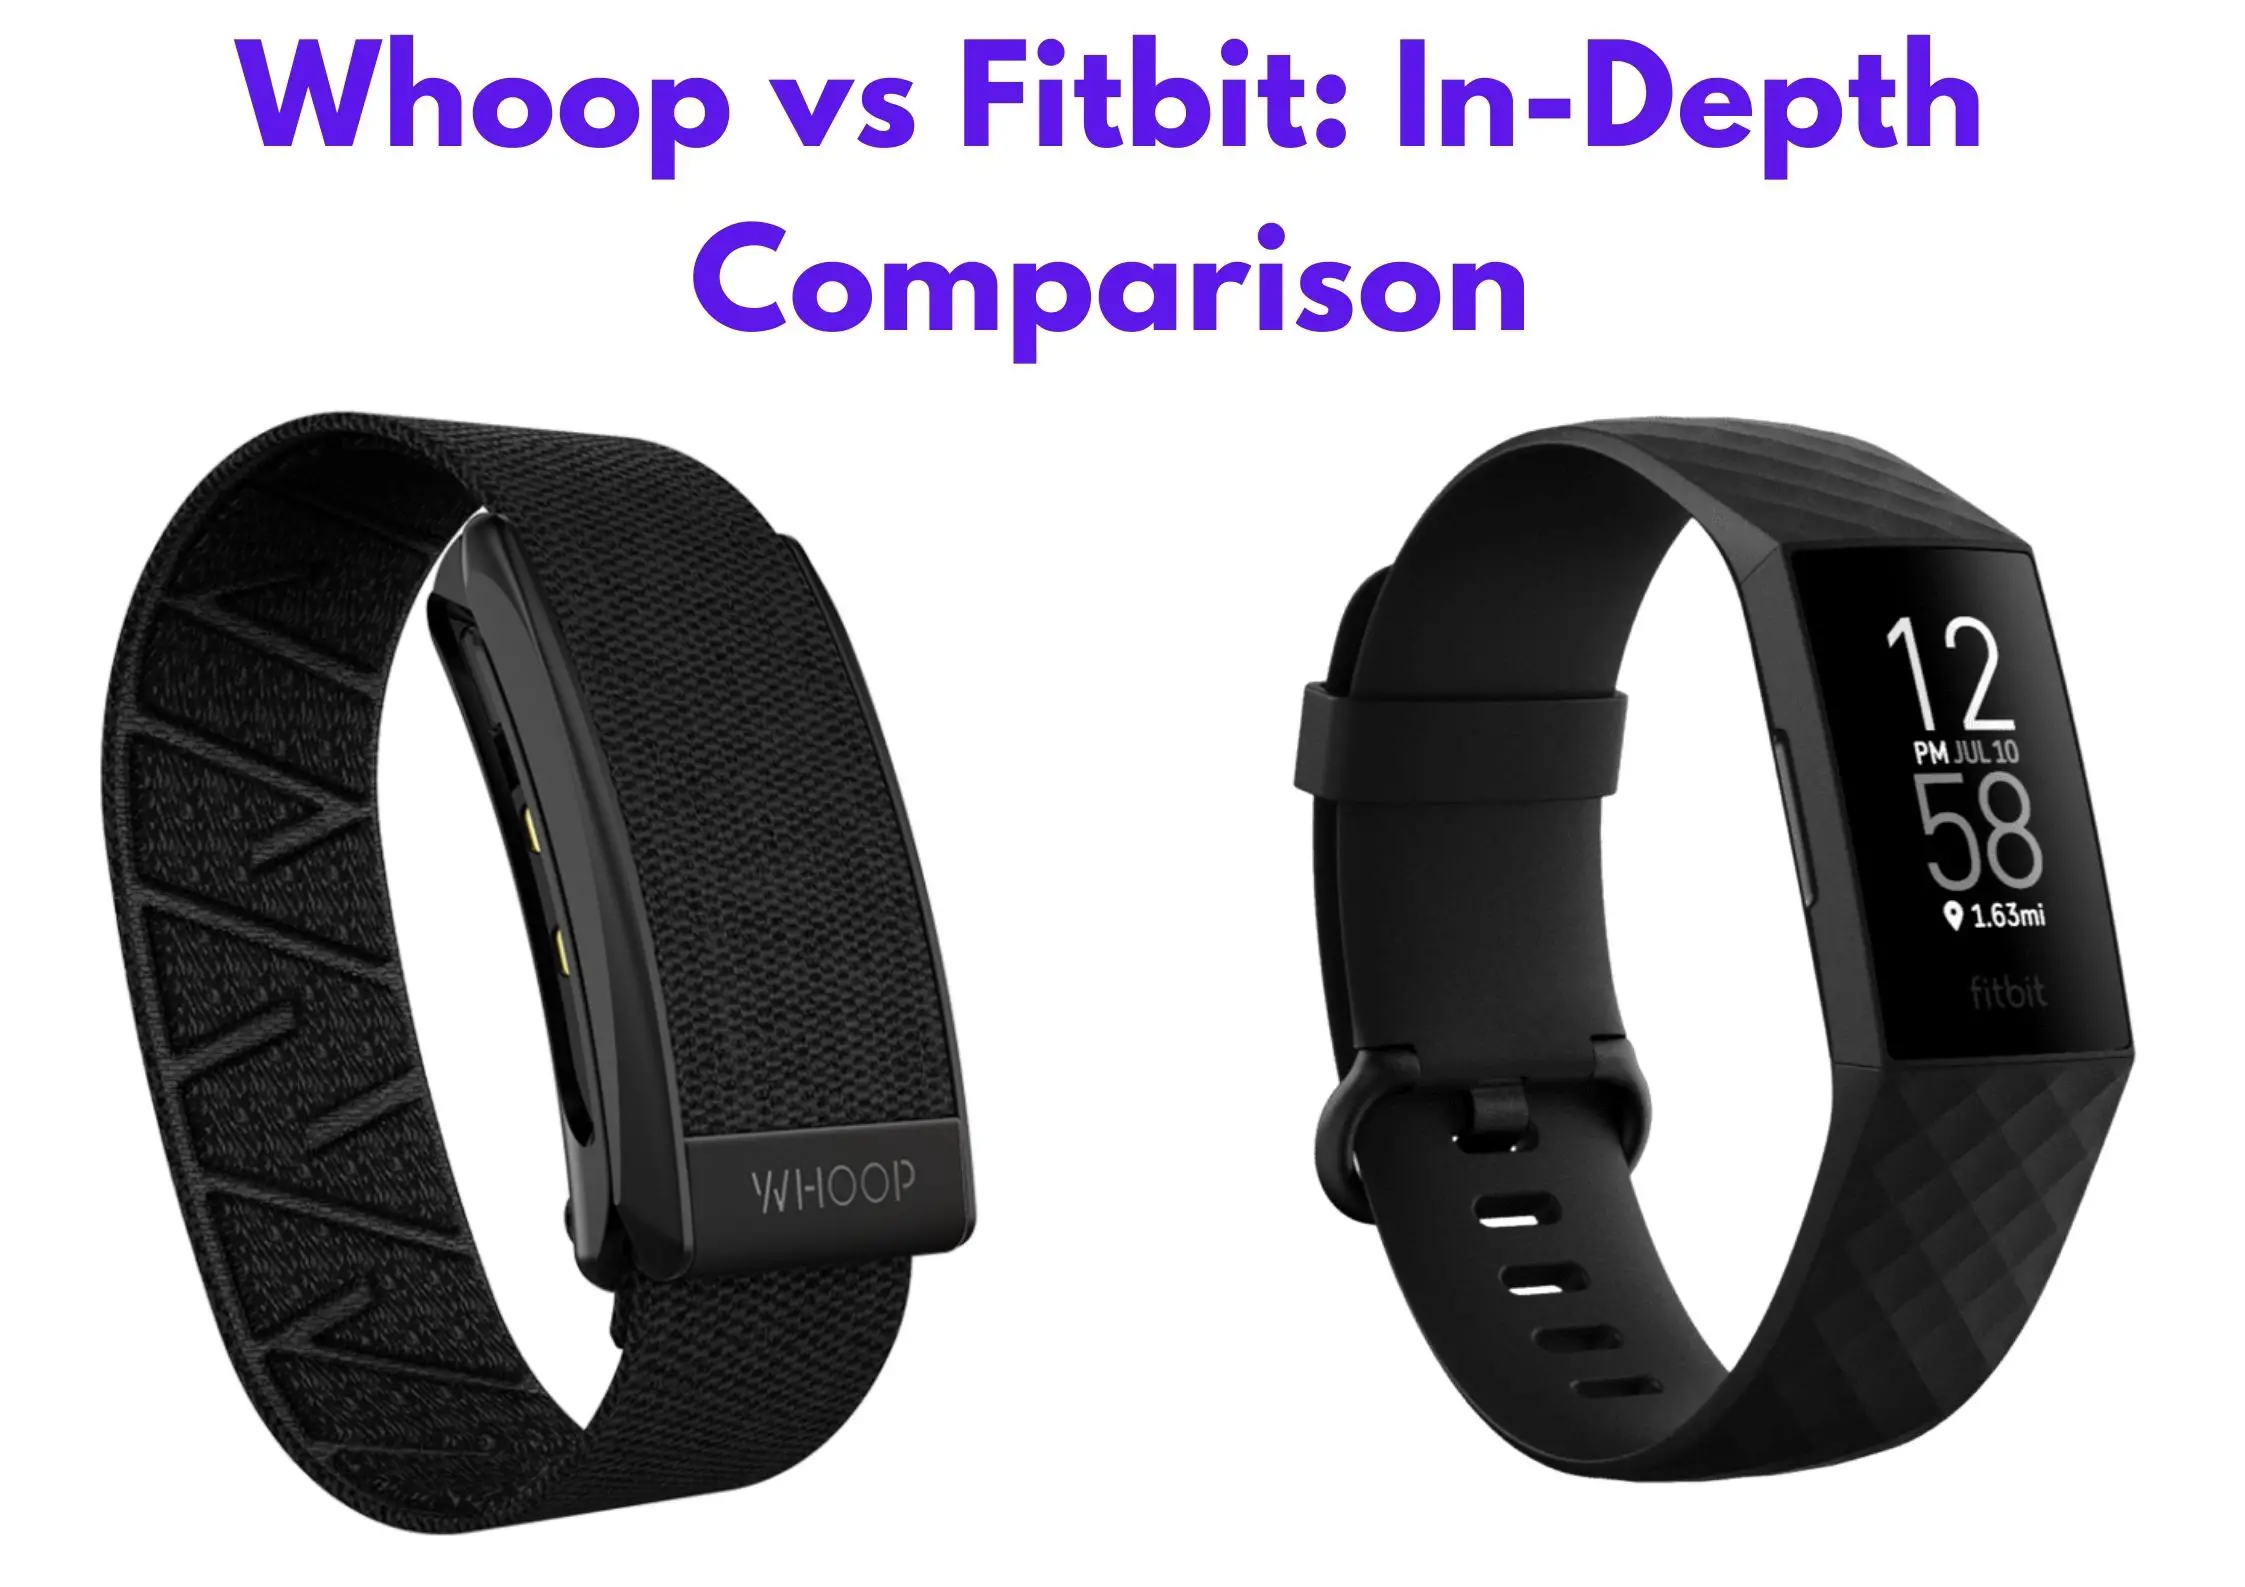 Whoop vs Fitbit: In-Depth Comparison for 2021